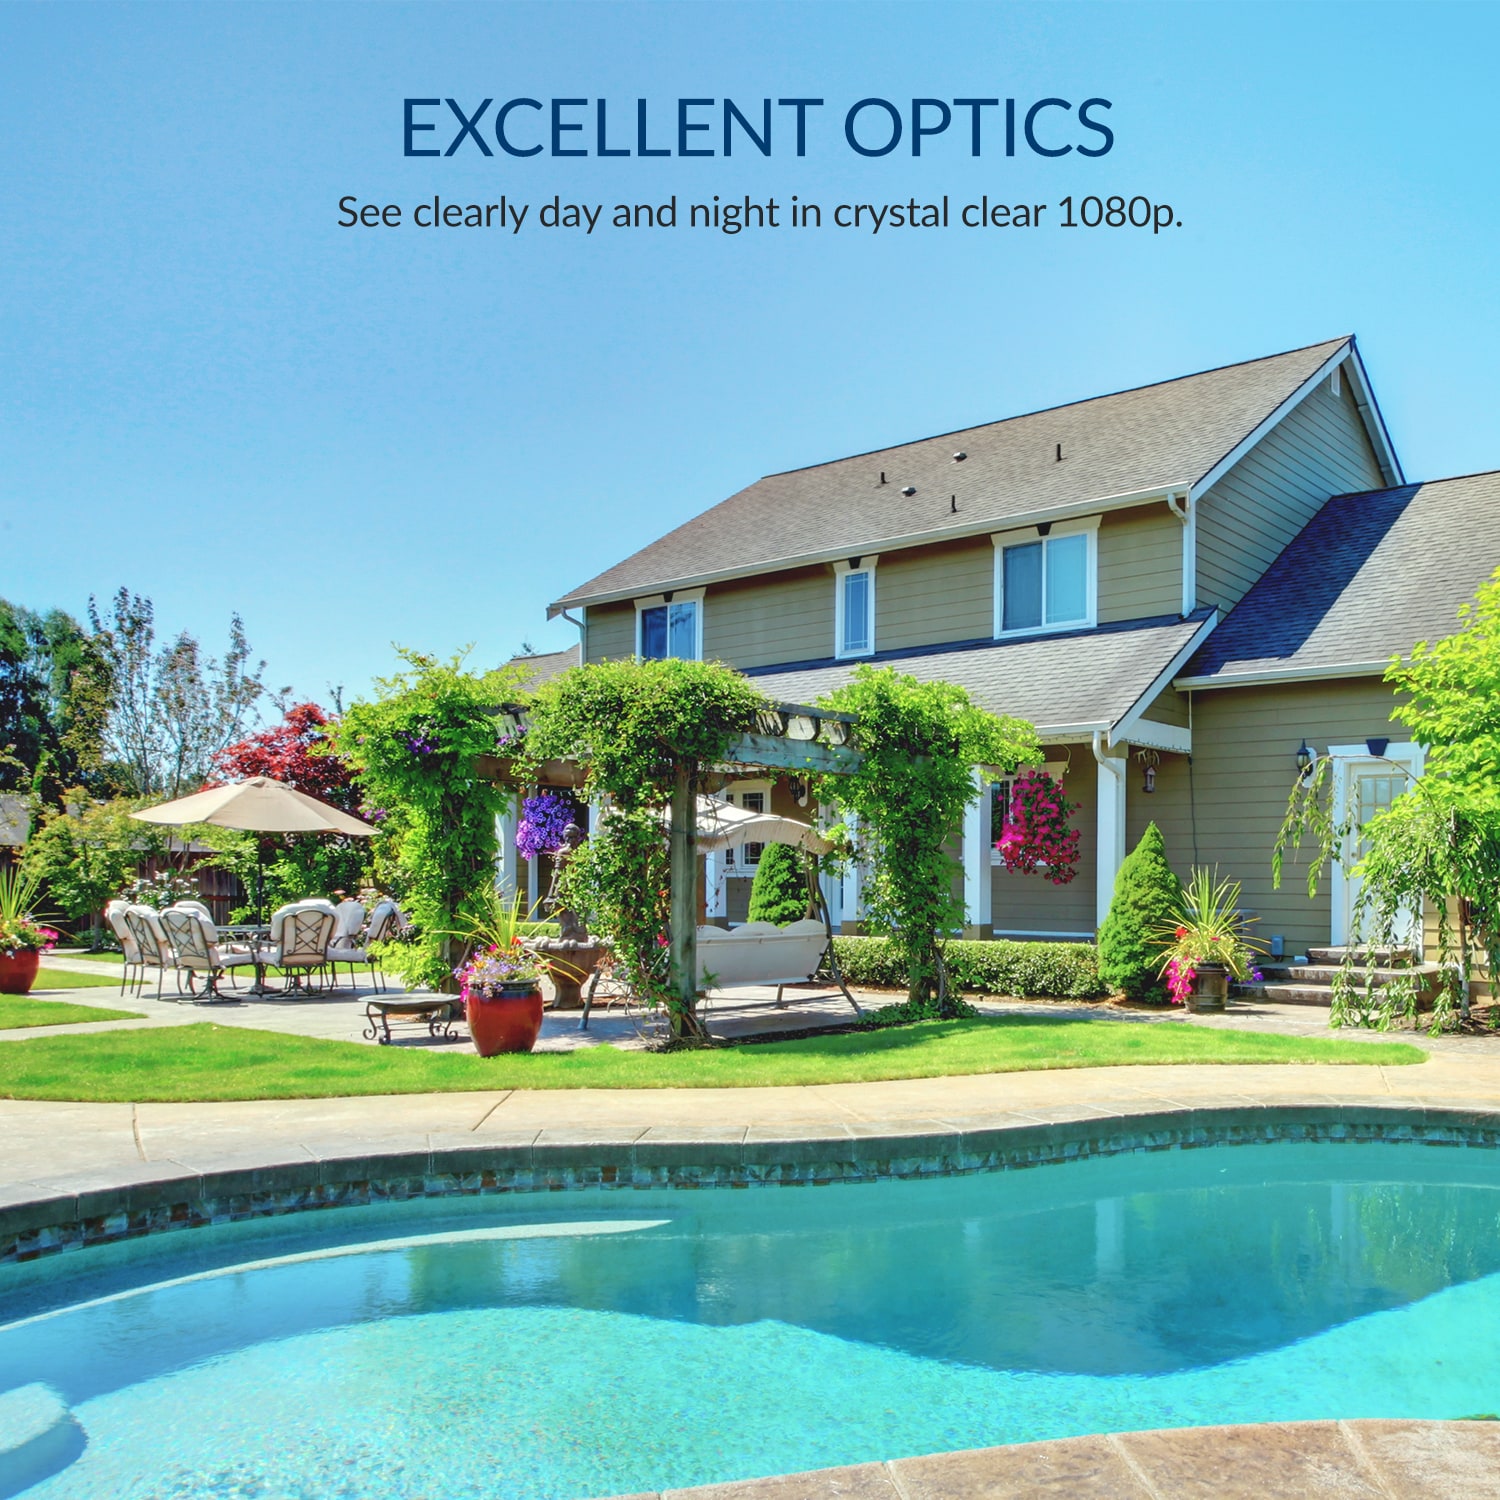 Excellent Optics - See clearly day and night in crystal clear 1080p